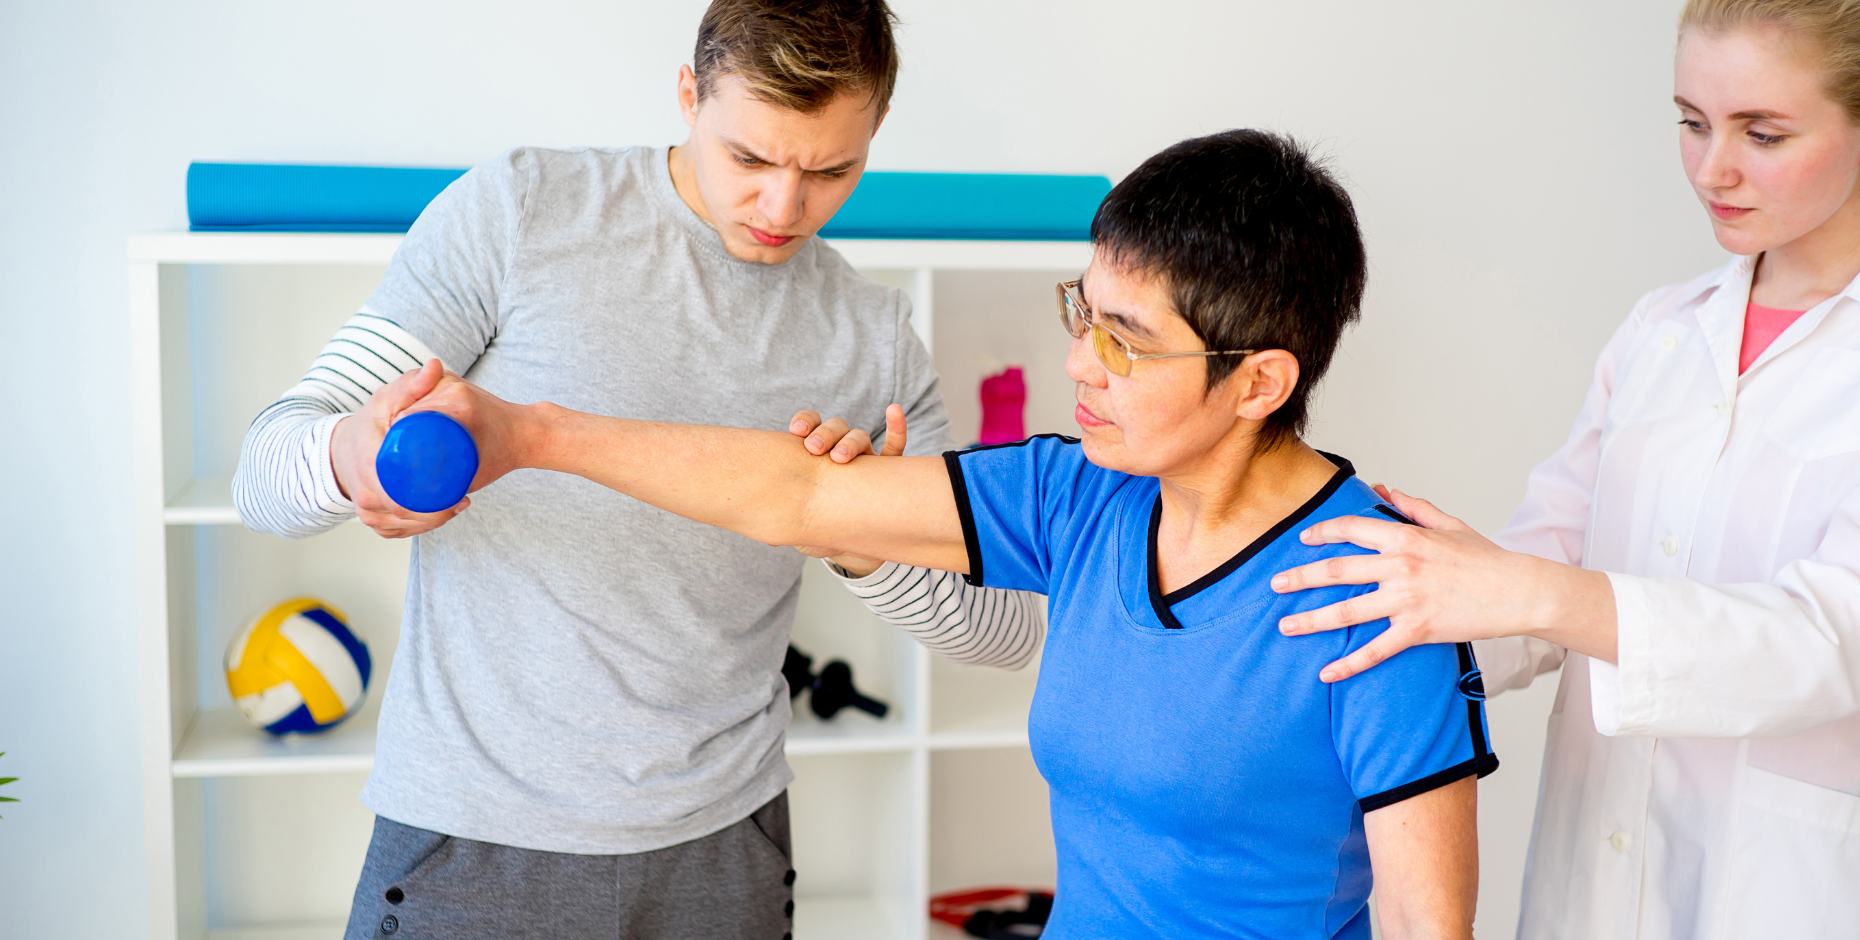 An older patient is lifting a small weight in their right hand with two clinicians correcting and monitoring their technique